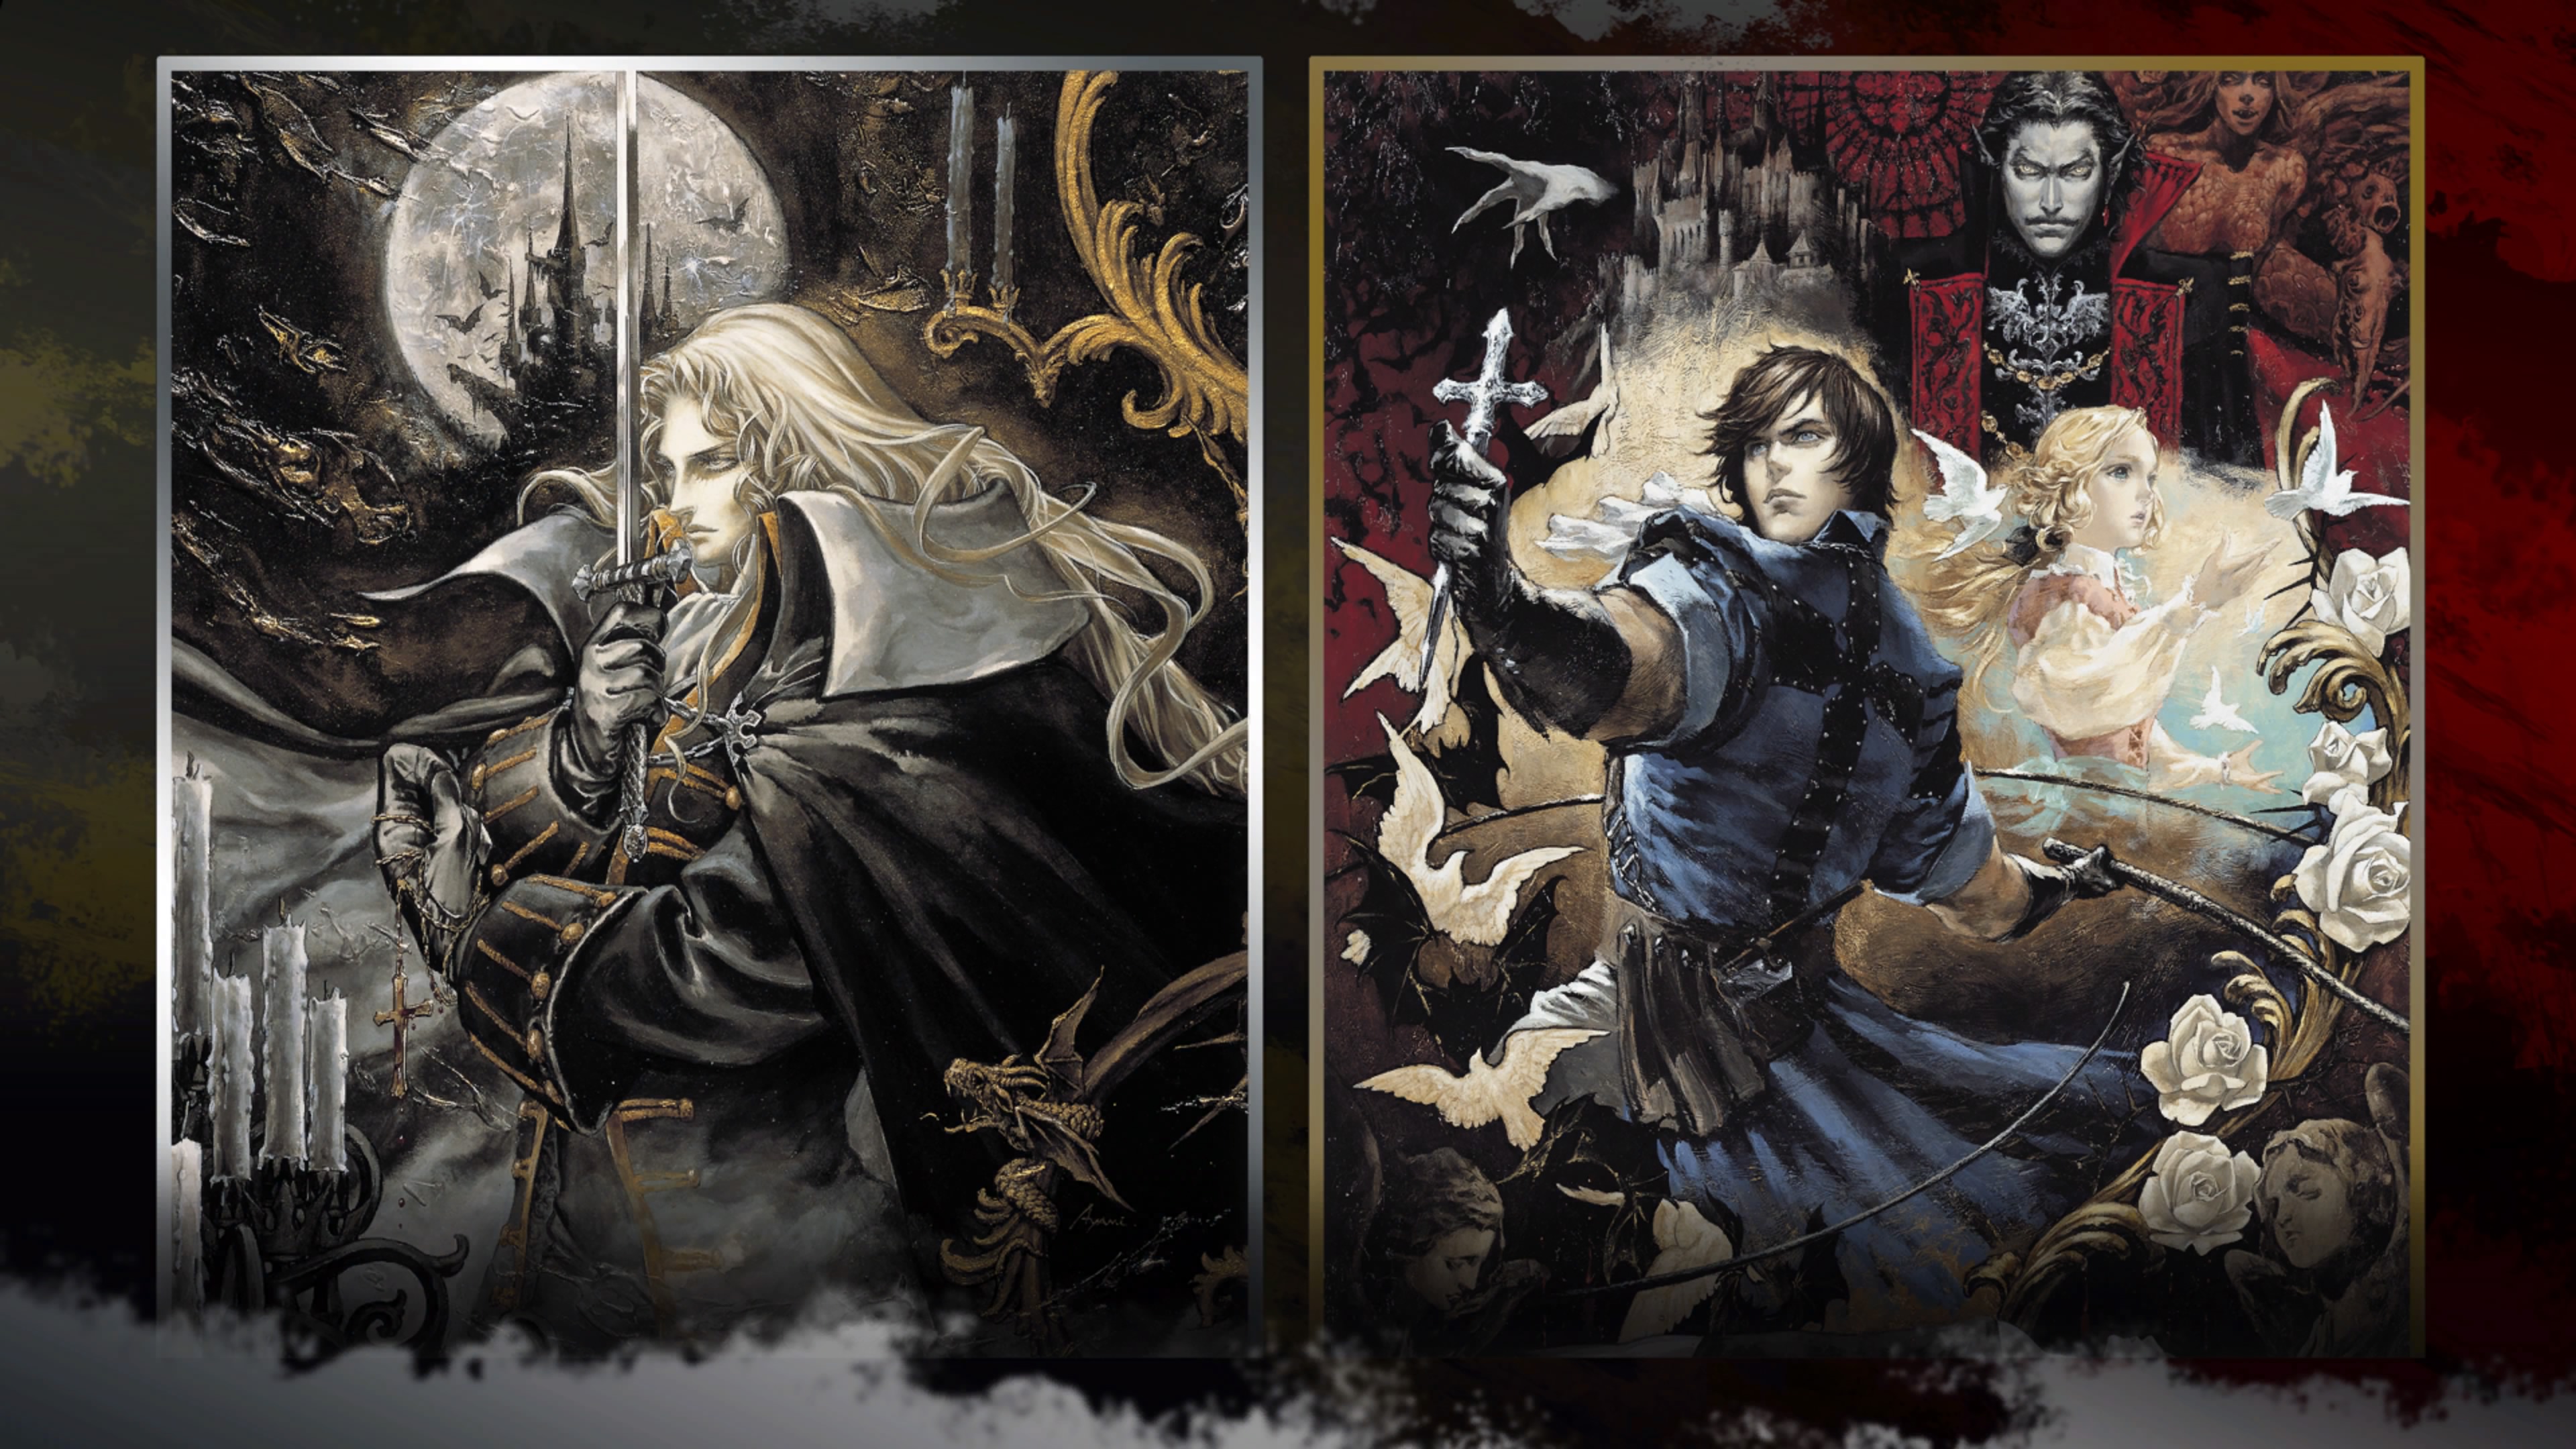 Castlevania Requiem: Symphony of the Night and Rondo of Blood Review